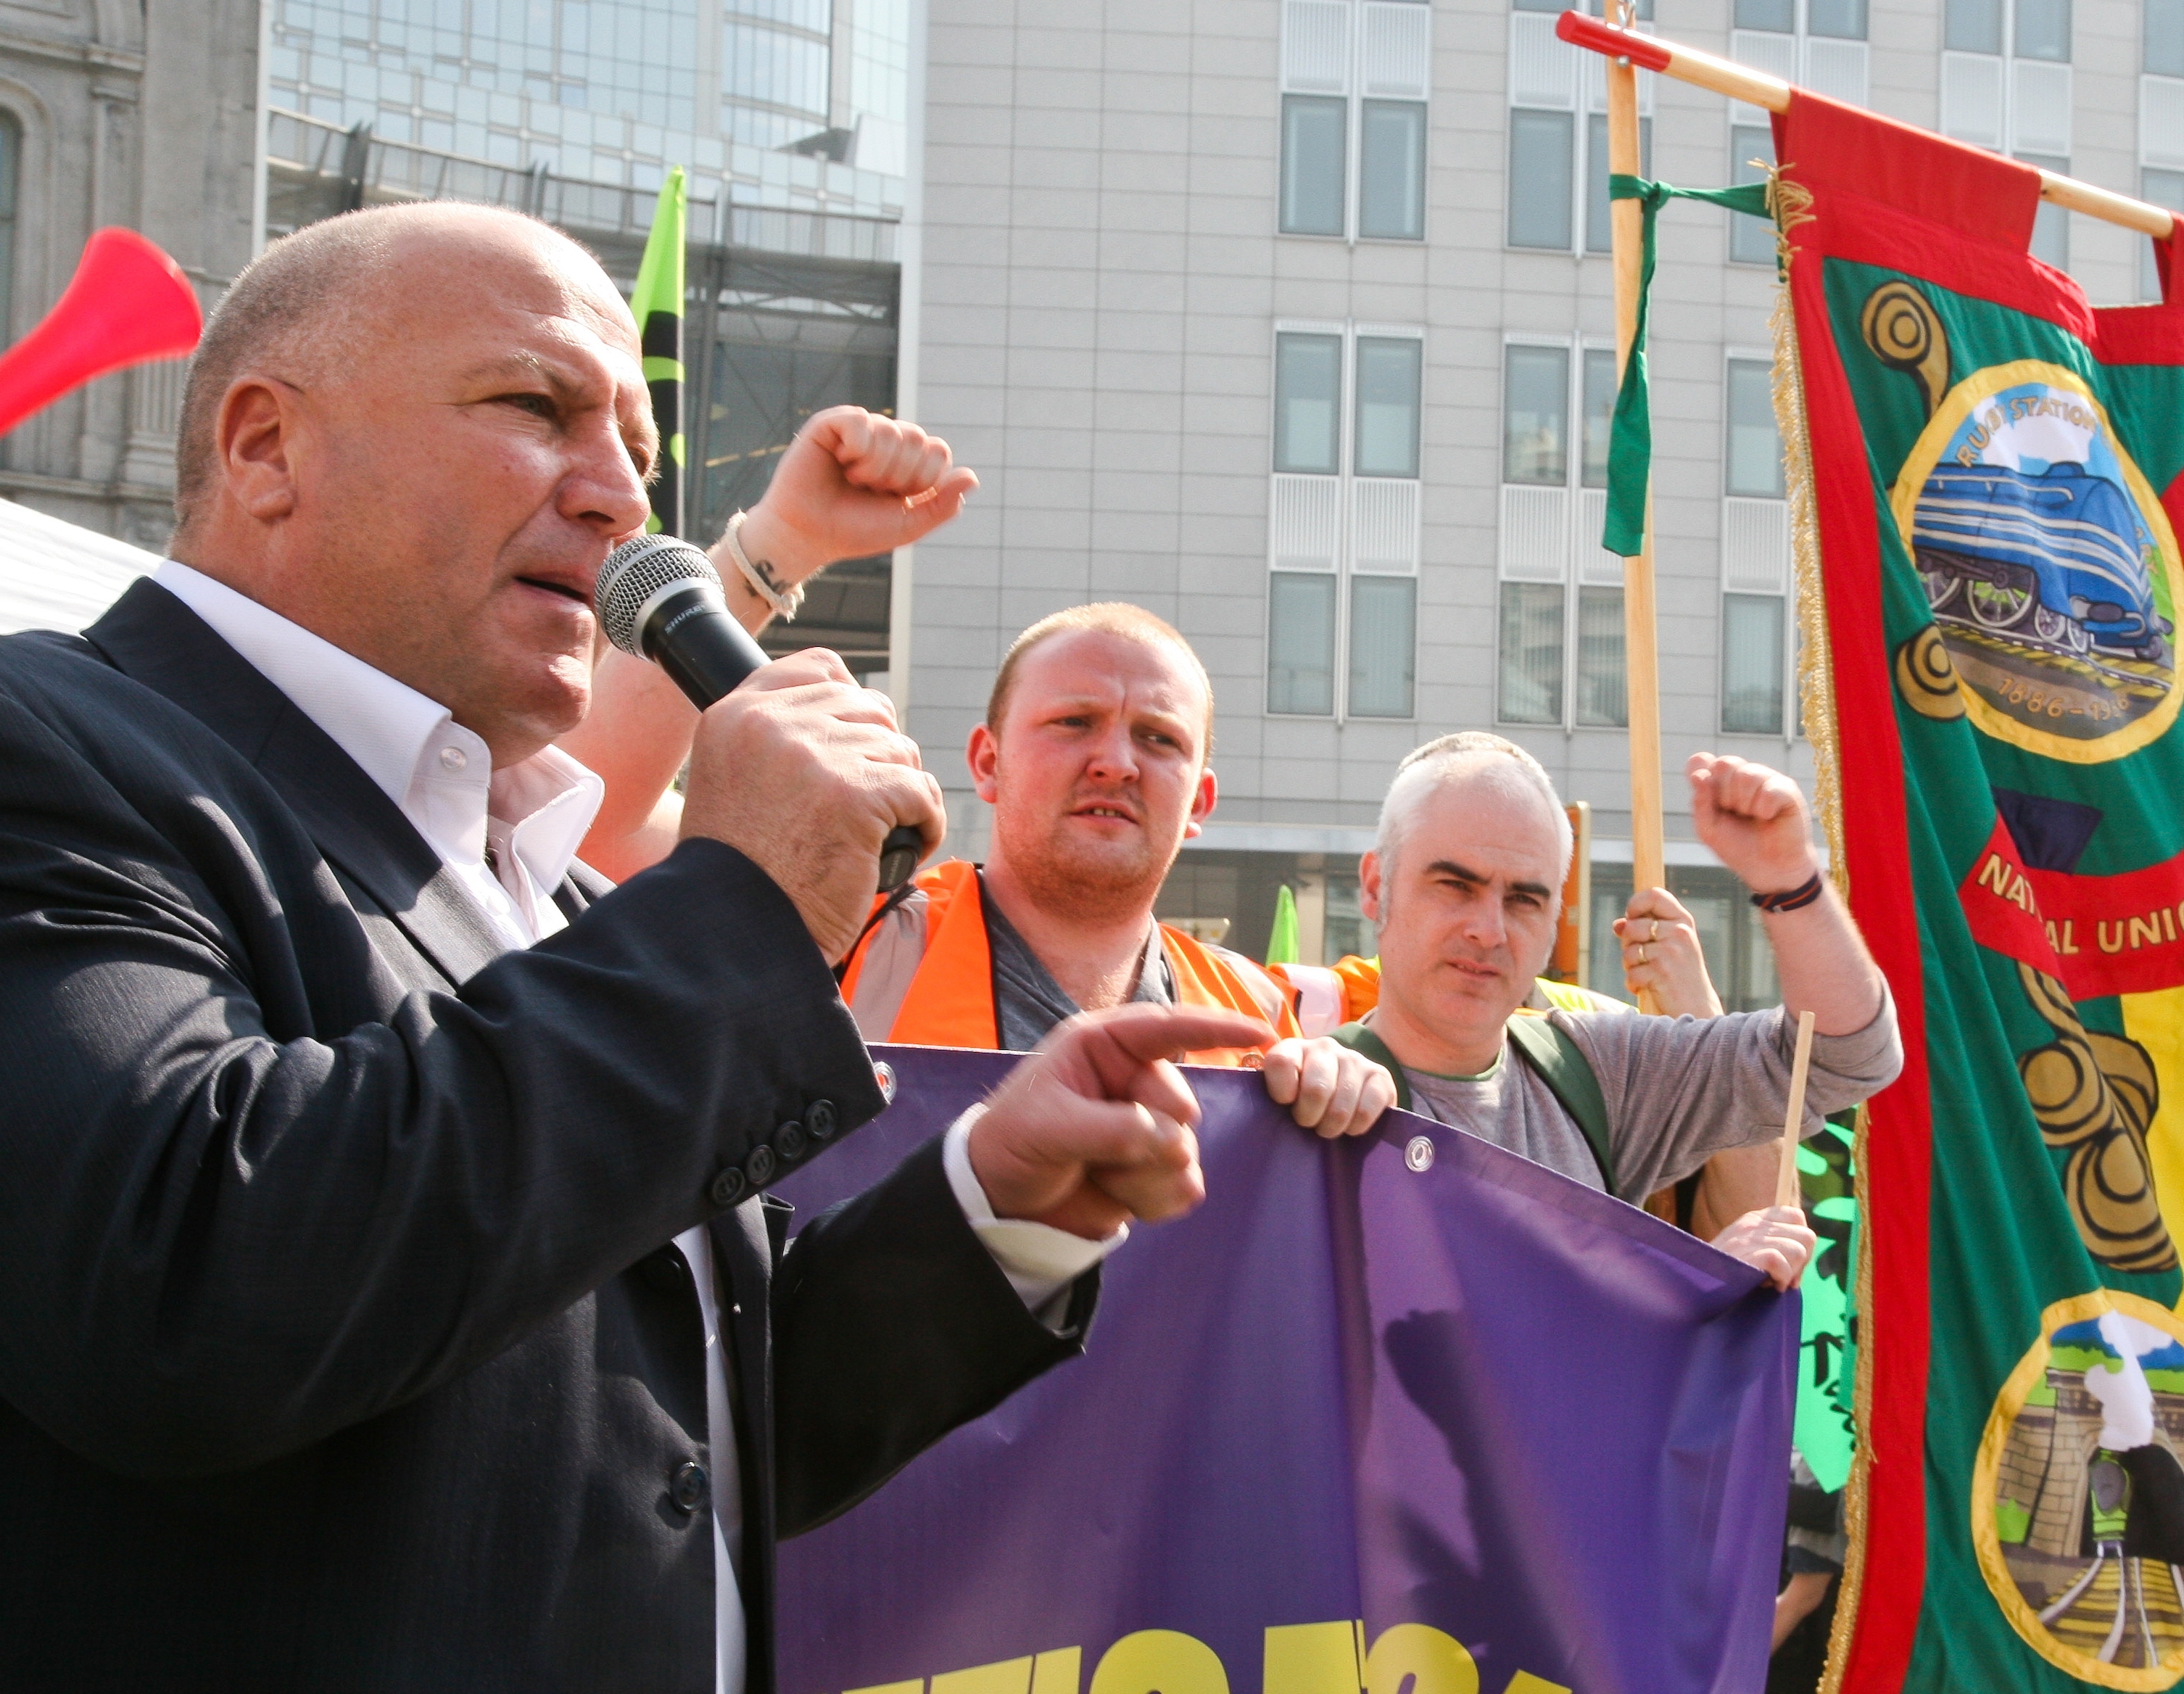 Demonstration in Brussels by transport workers' unions